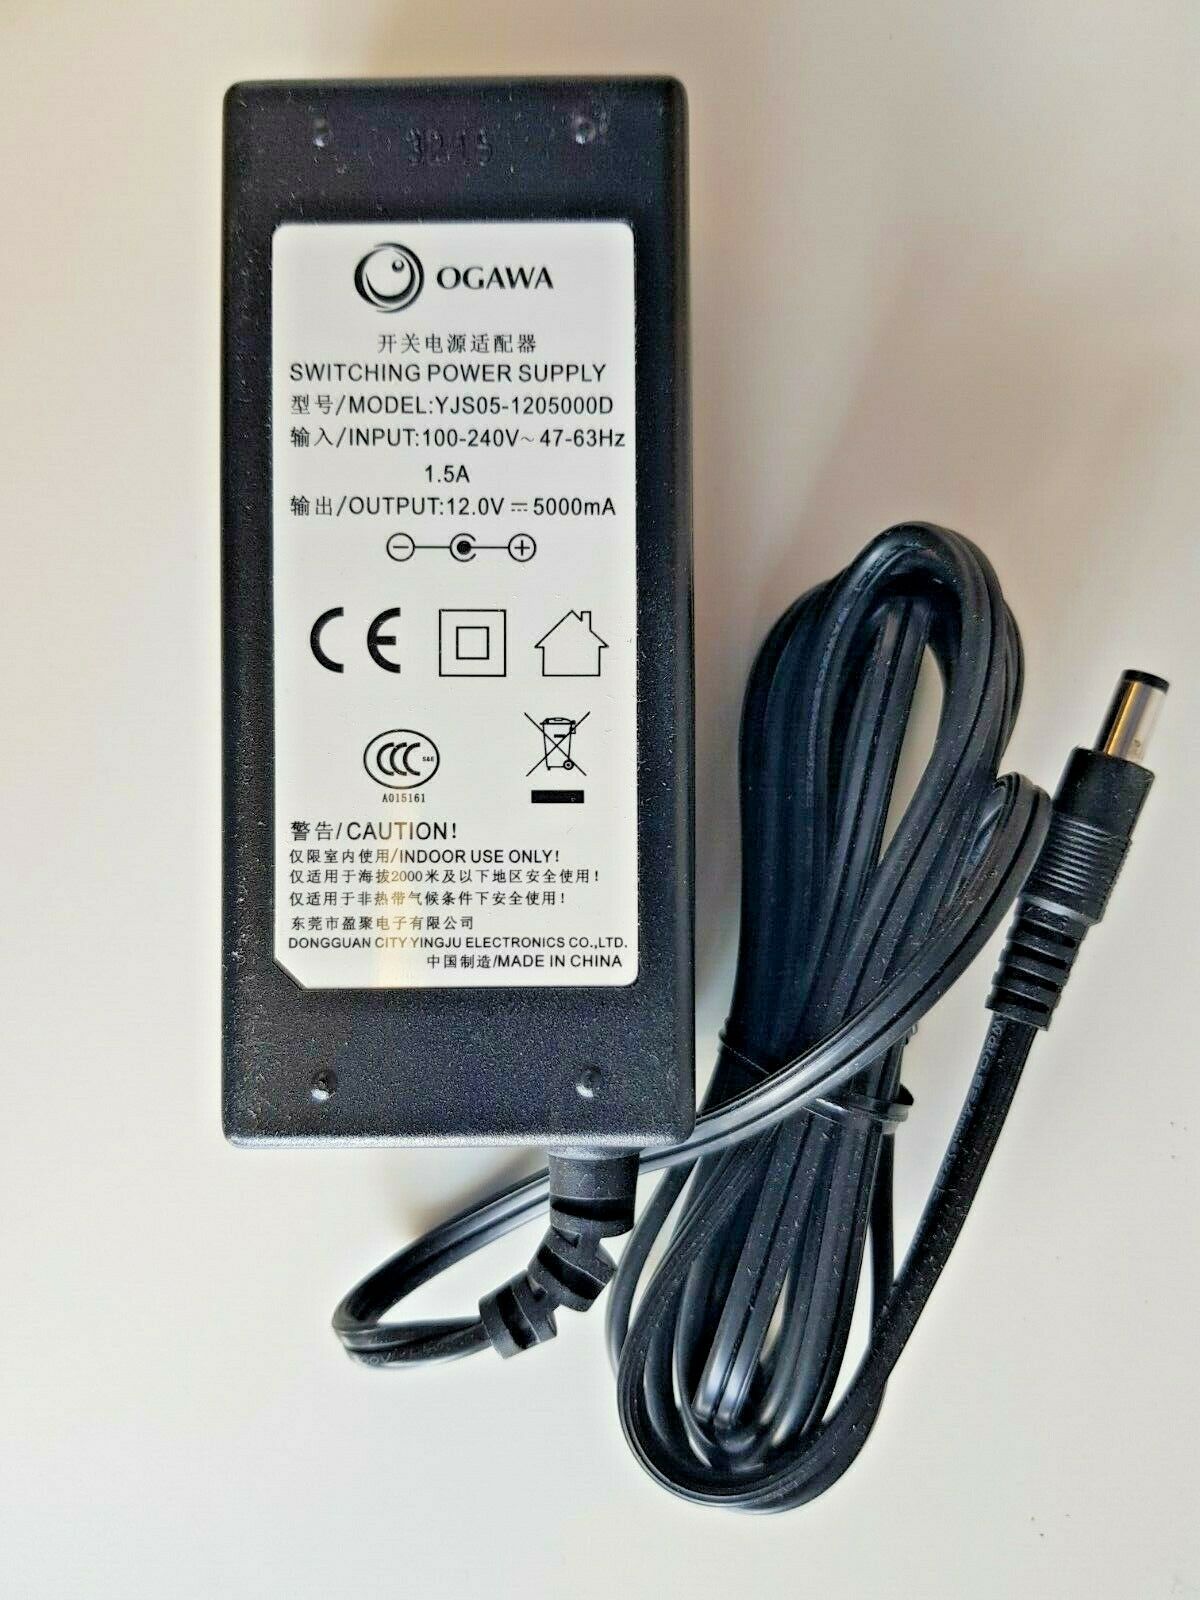 OGAWA 12.0V 5000mA Switching Power Supply Model YJS05-1205000D 12V 5A Output Current: 5A Manufacturer Warranty: 1 year - Click Image to Close